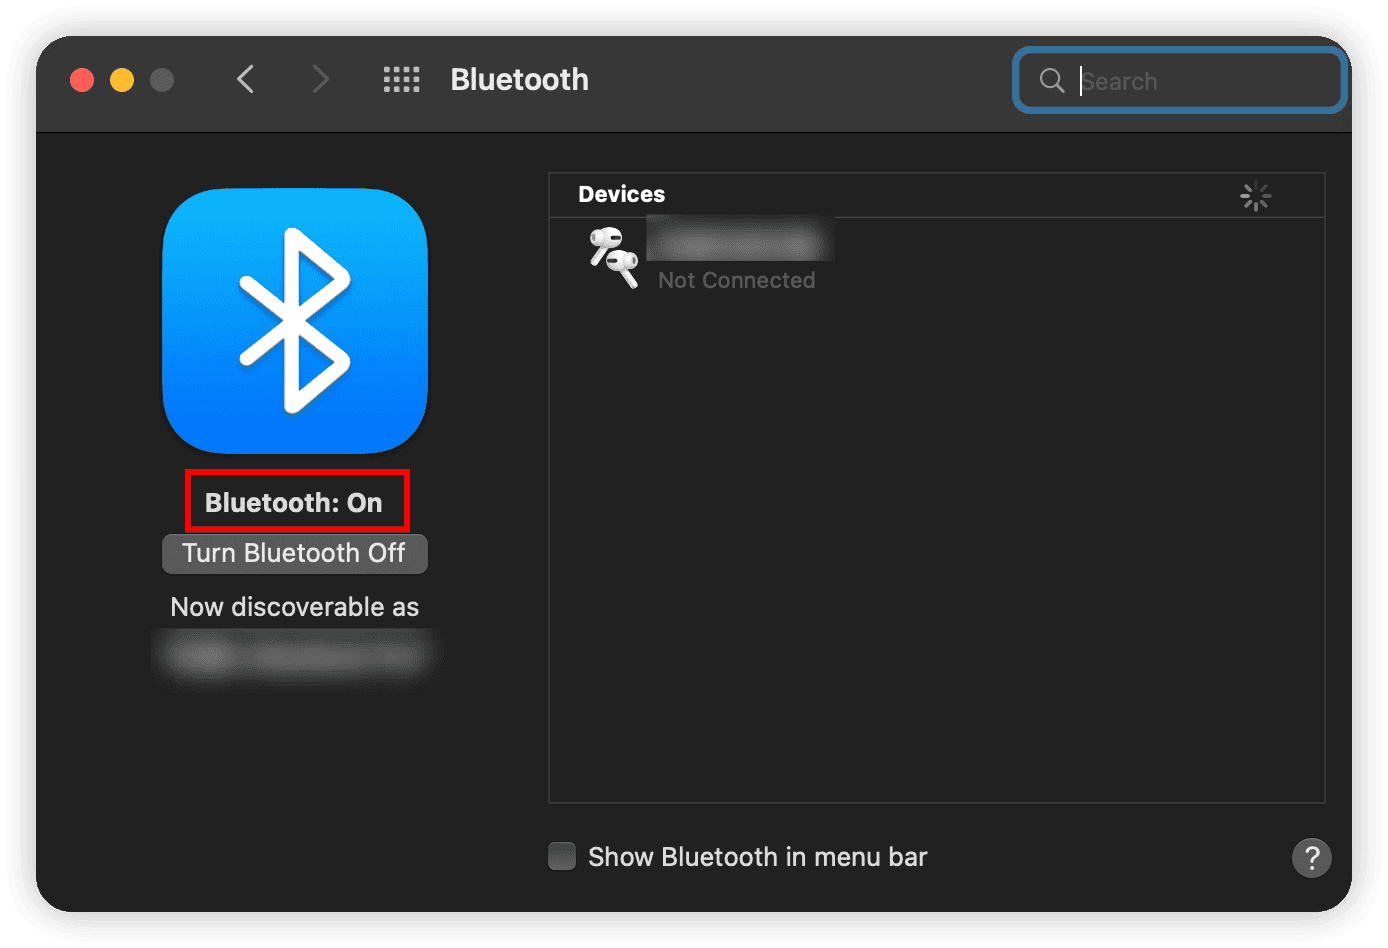 Activate Bluetooth in System Preferences